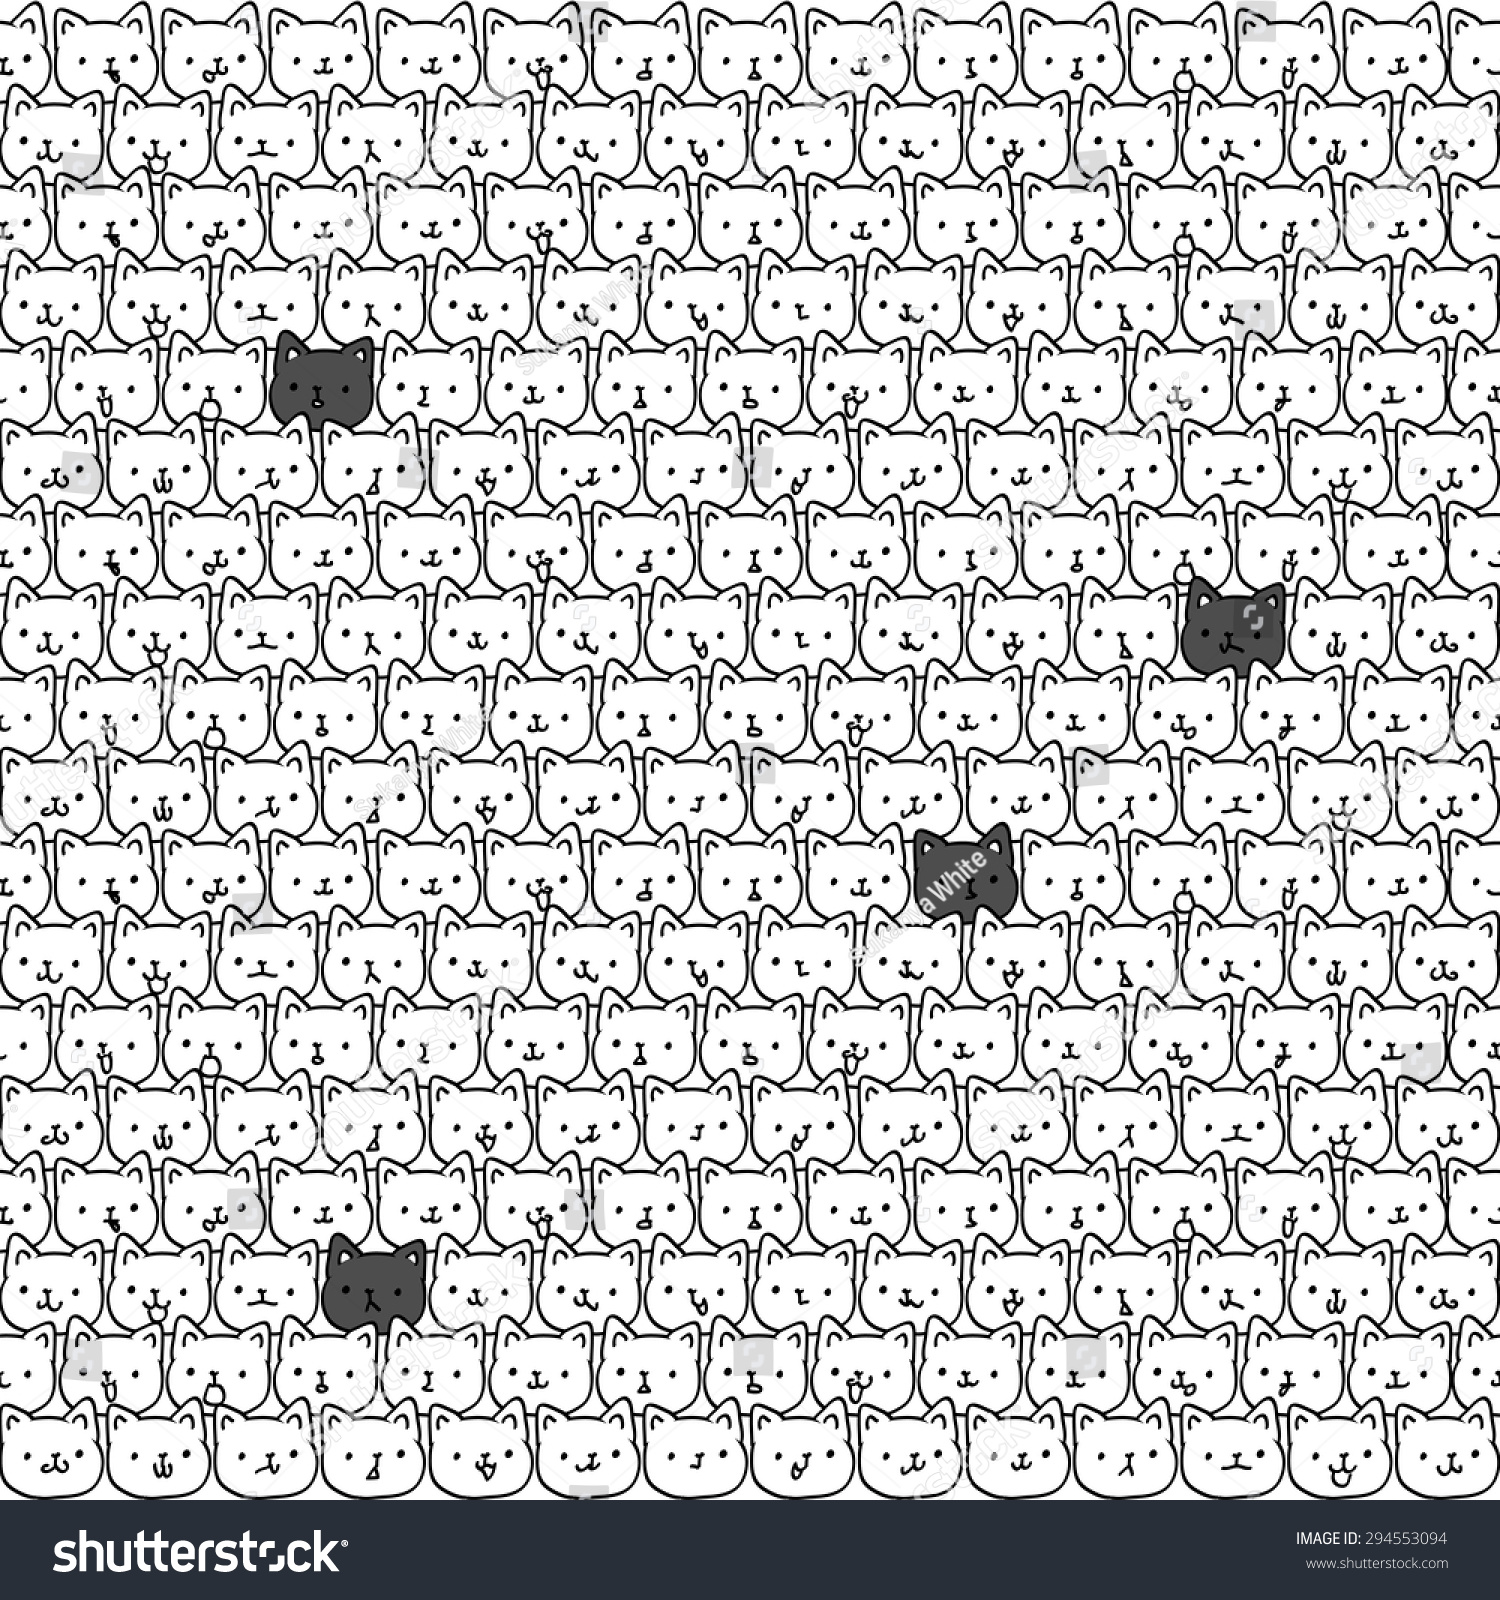 Seamless Doodle White And Black Cat Pattern. Stock Vector Illustration ...